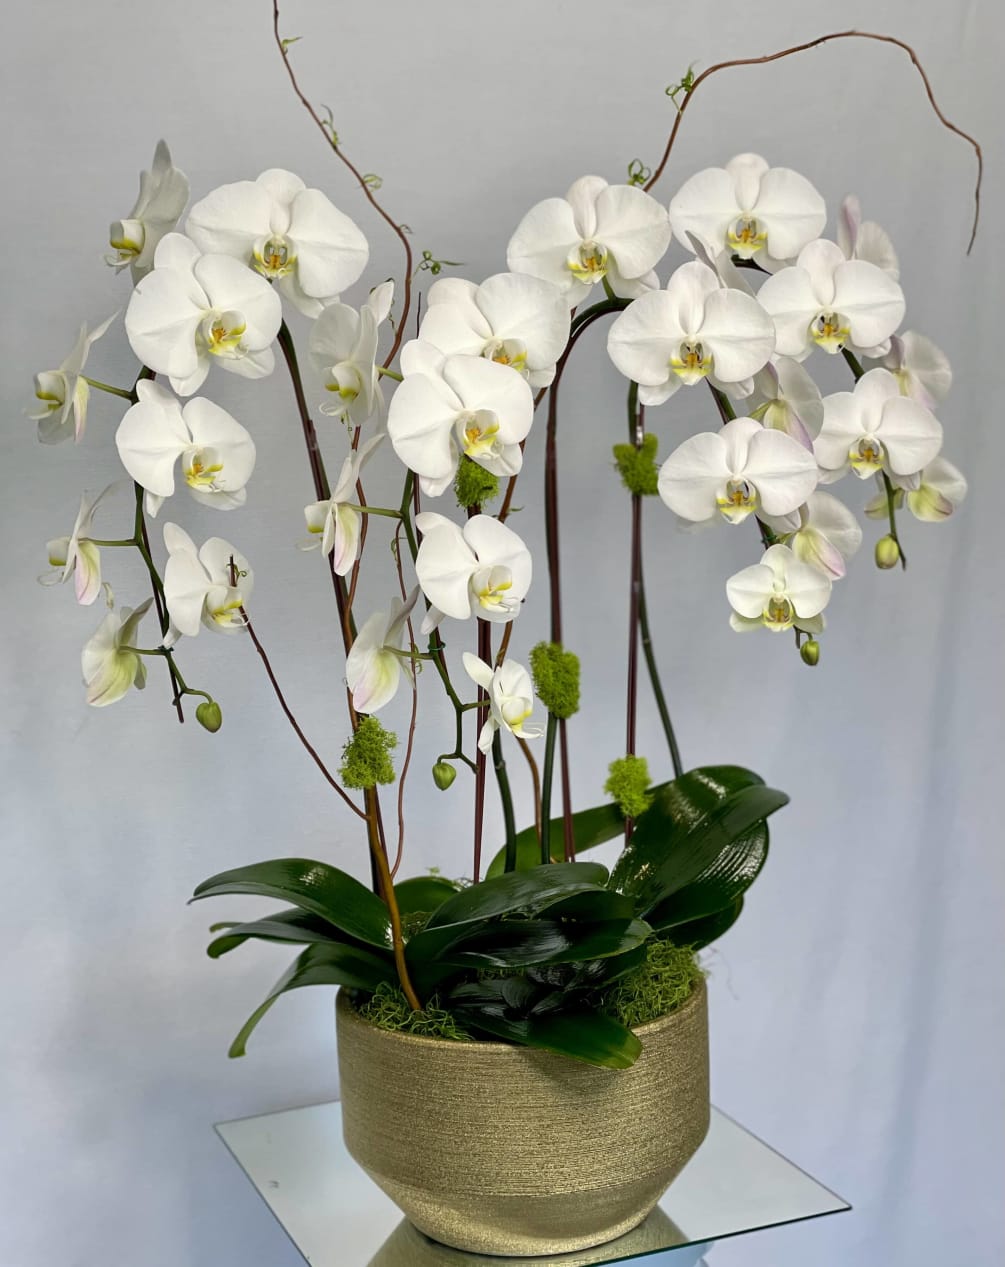 4 elegant Phalaenopsis orchids, curly willow, succulent plants arranged in a golden